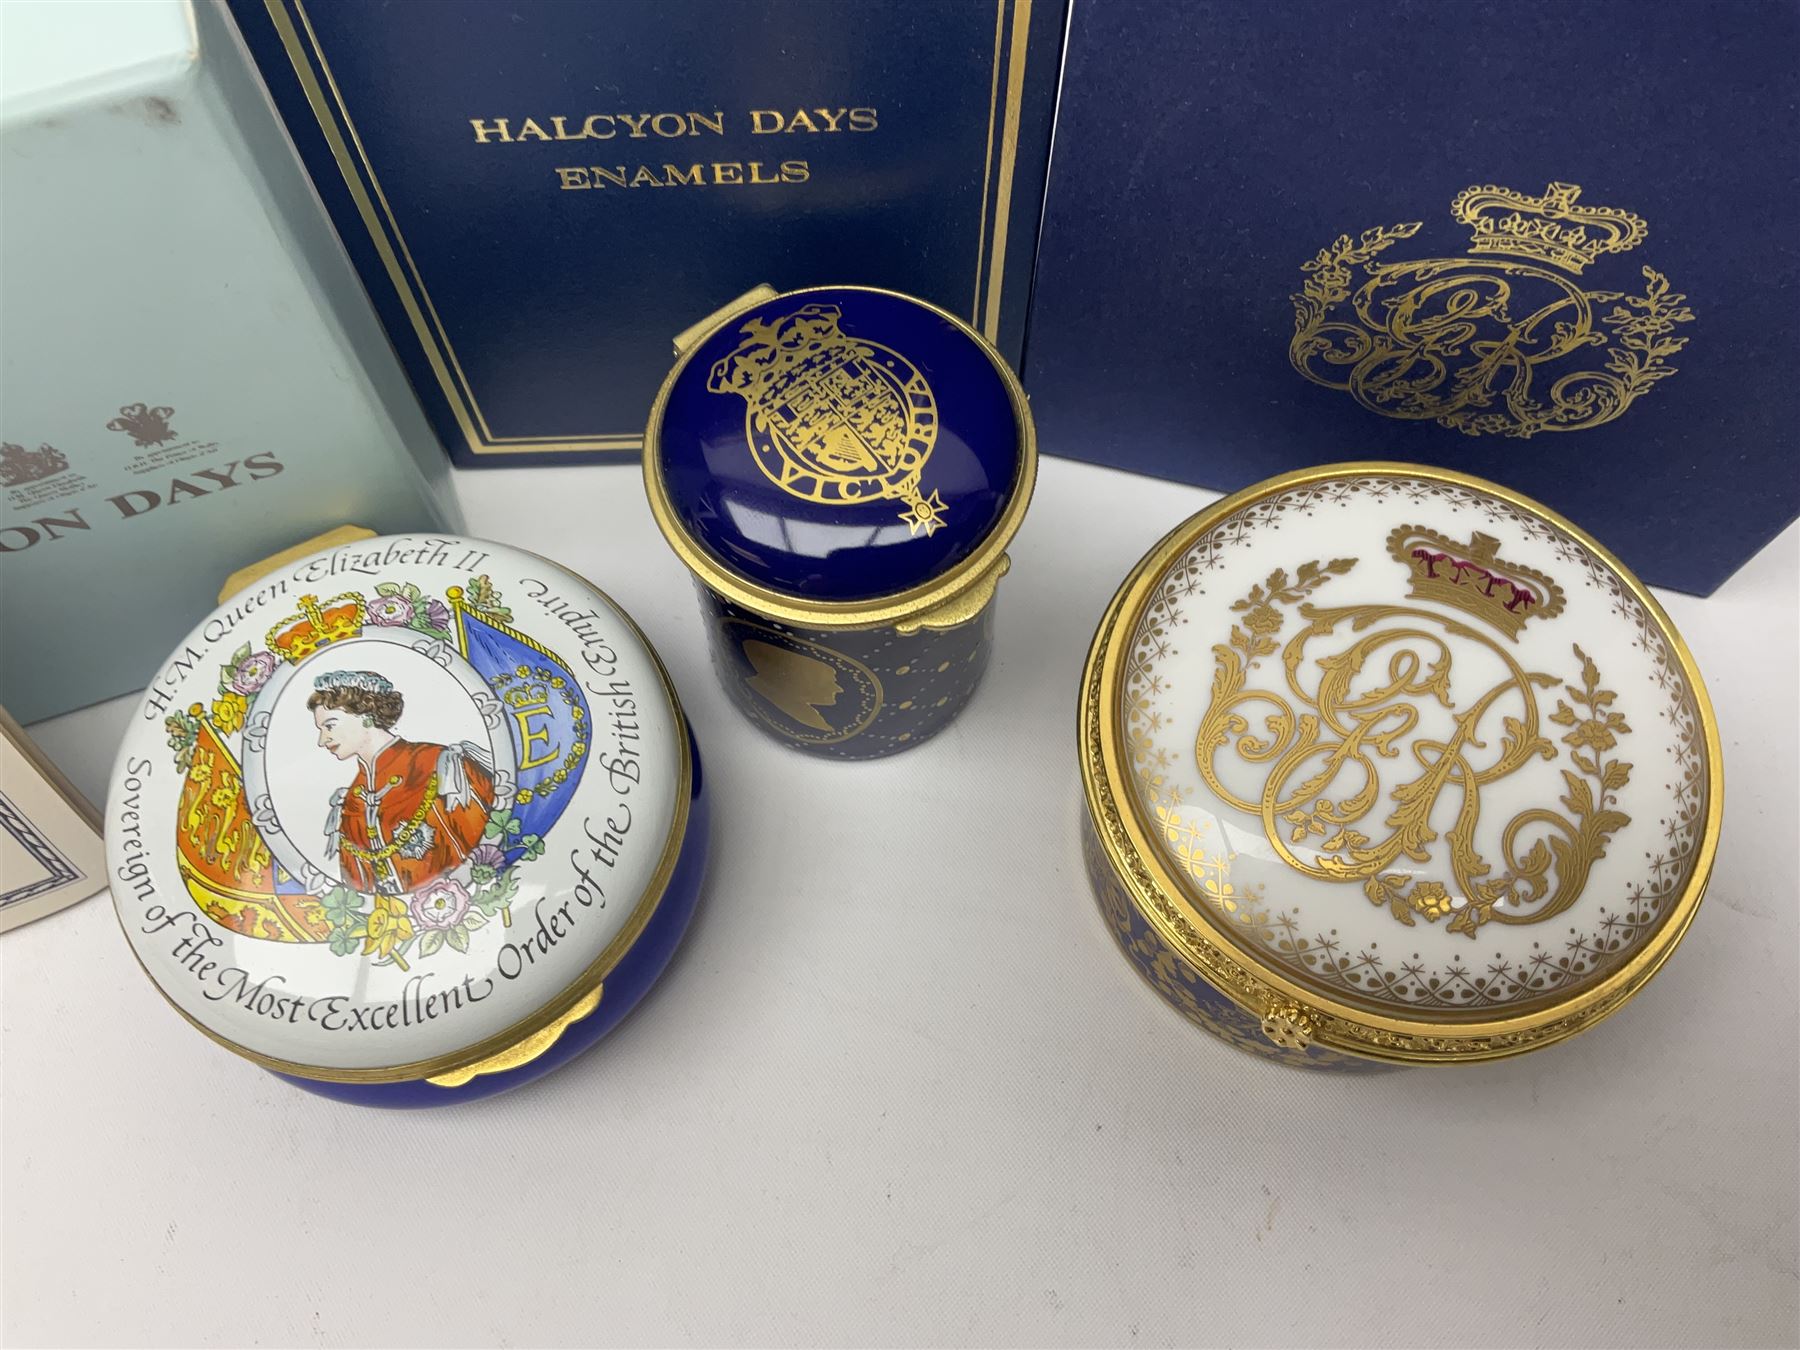 Five Halcyon Days Royal commemorative enamel boxes and one other similar enamel box - Image 11 of 15